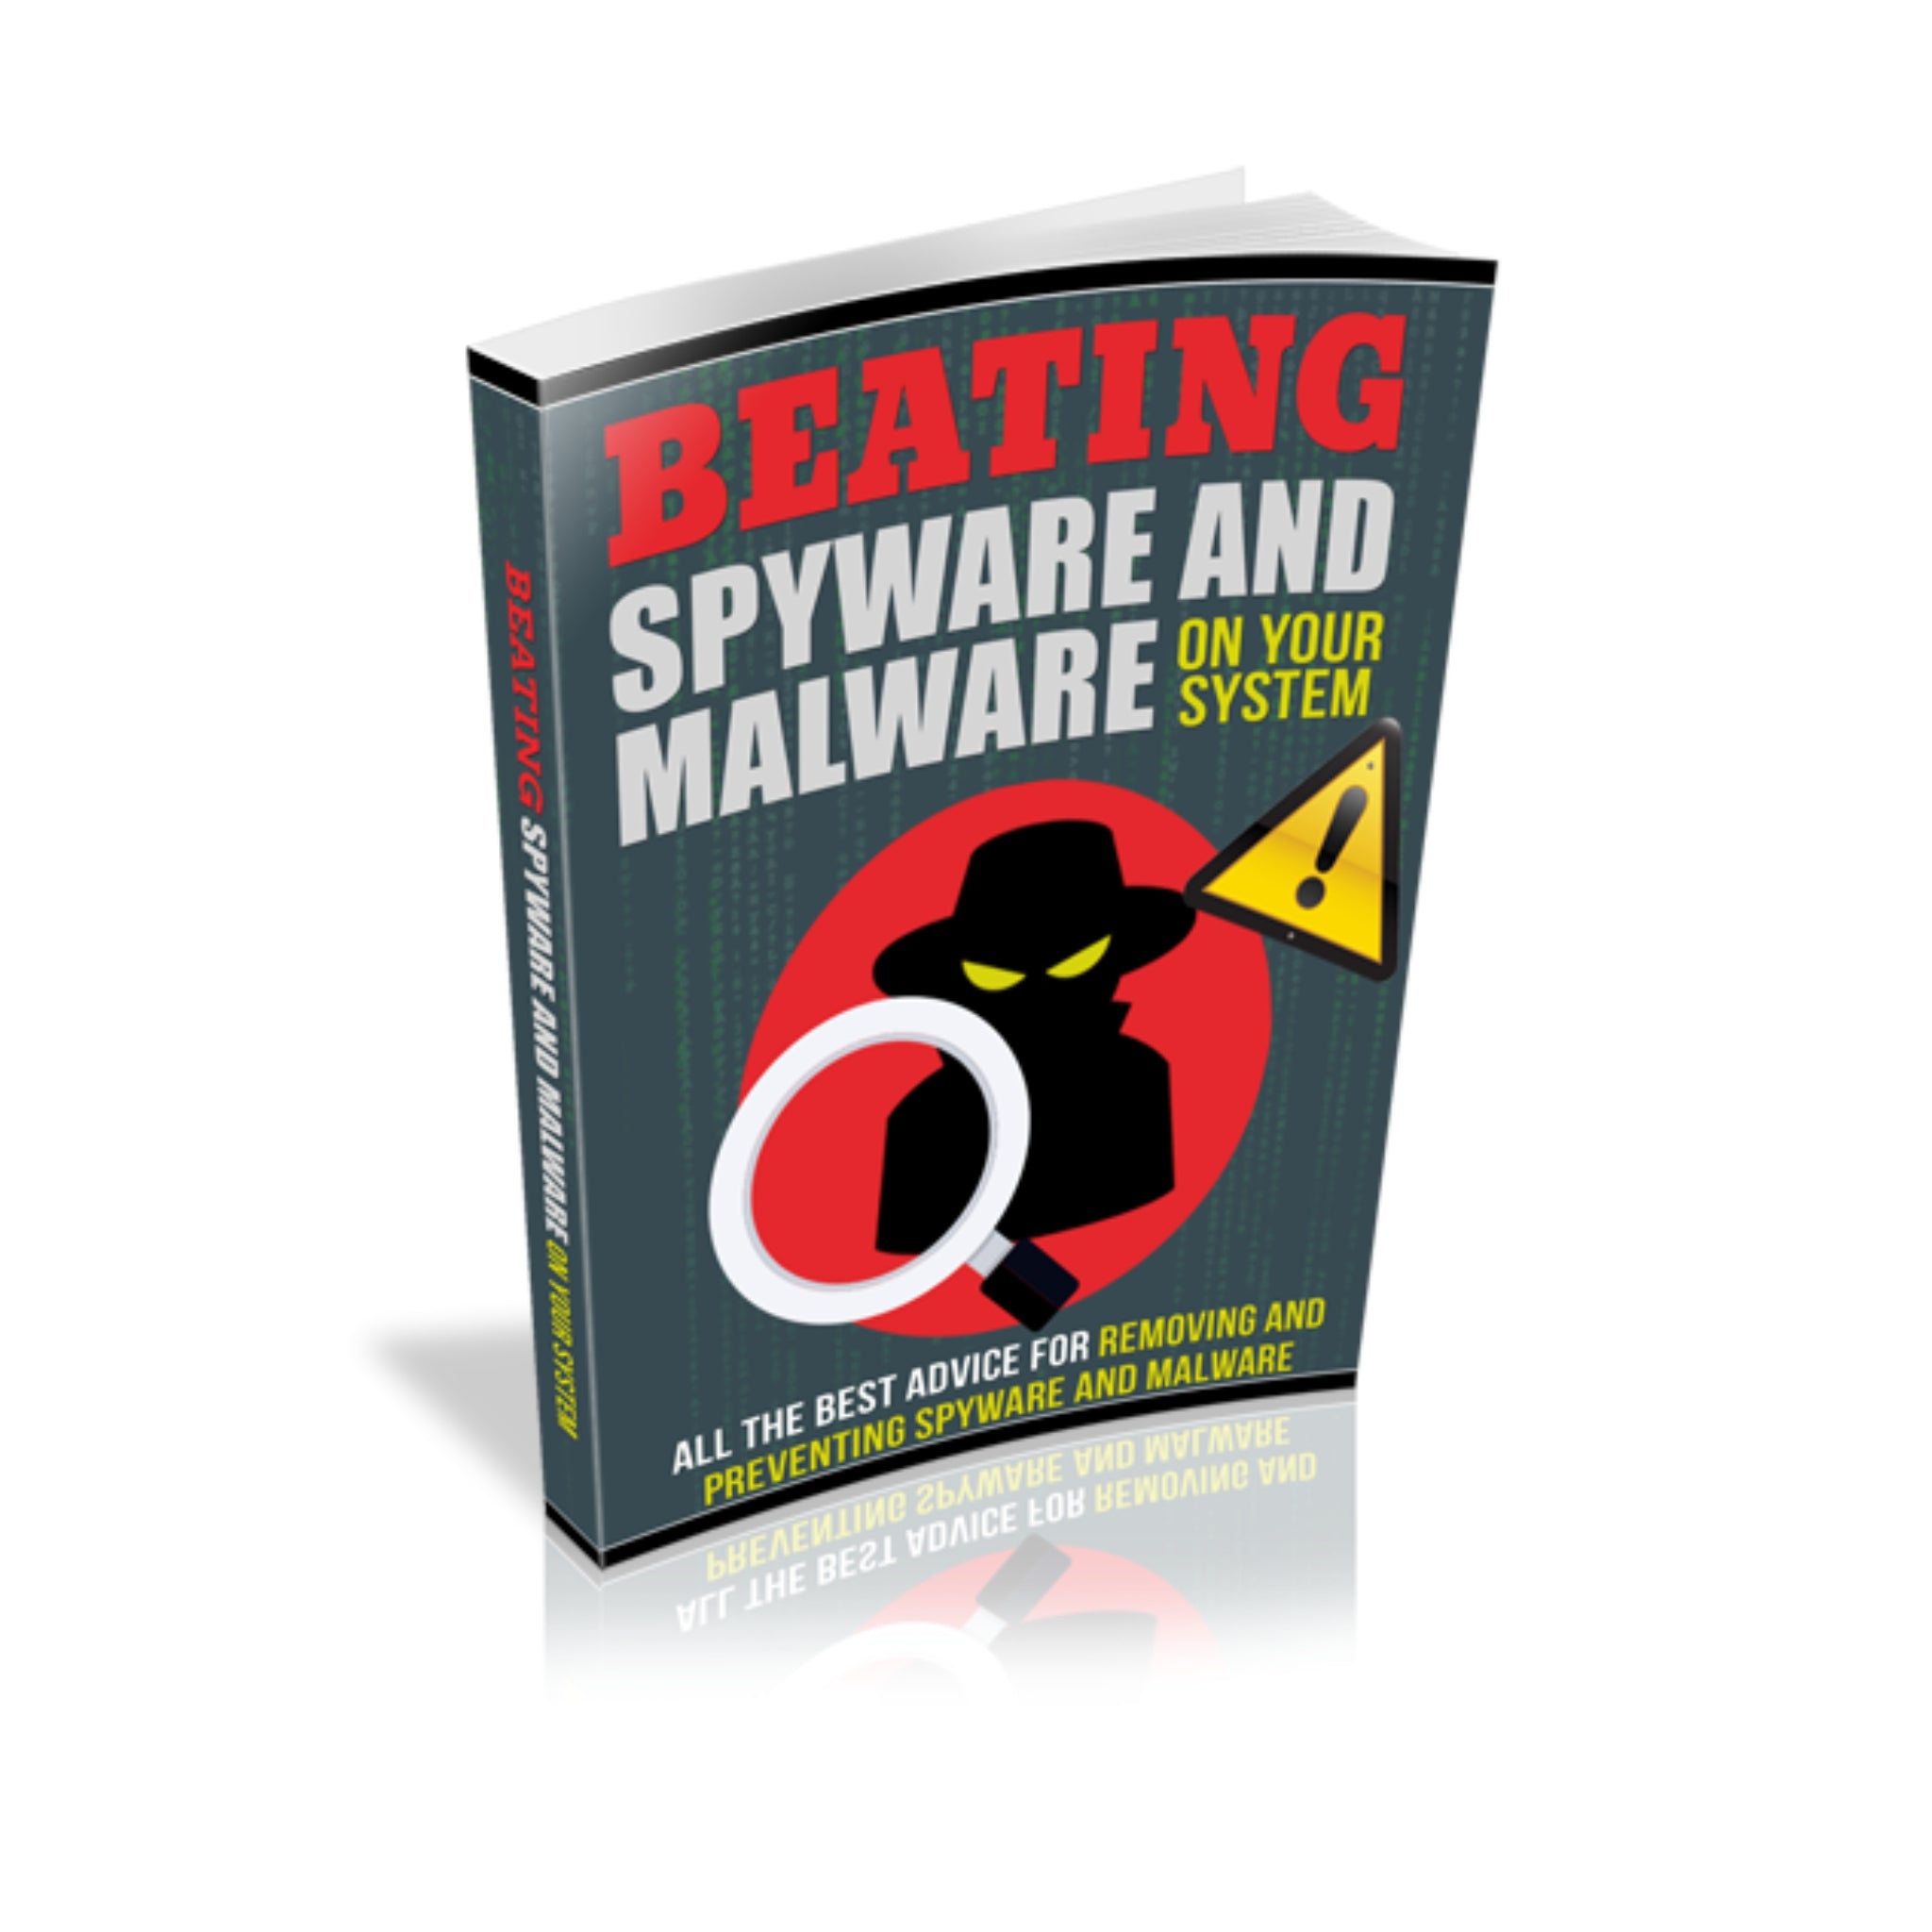 Beating Spyware And Malware on Your System Ebook